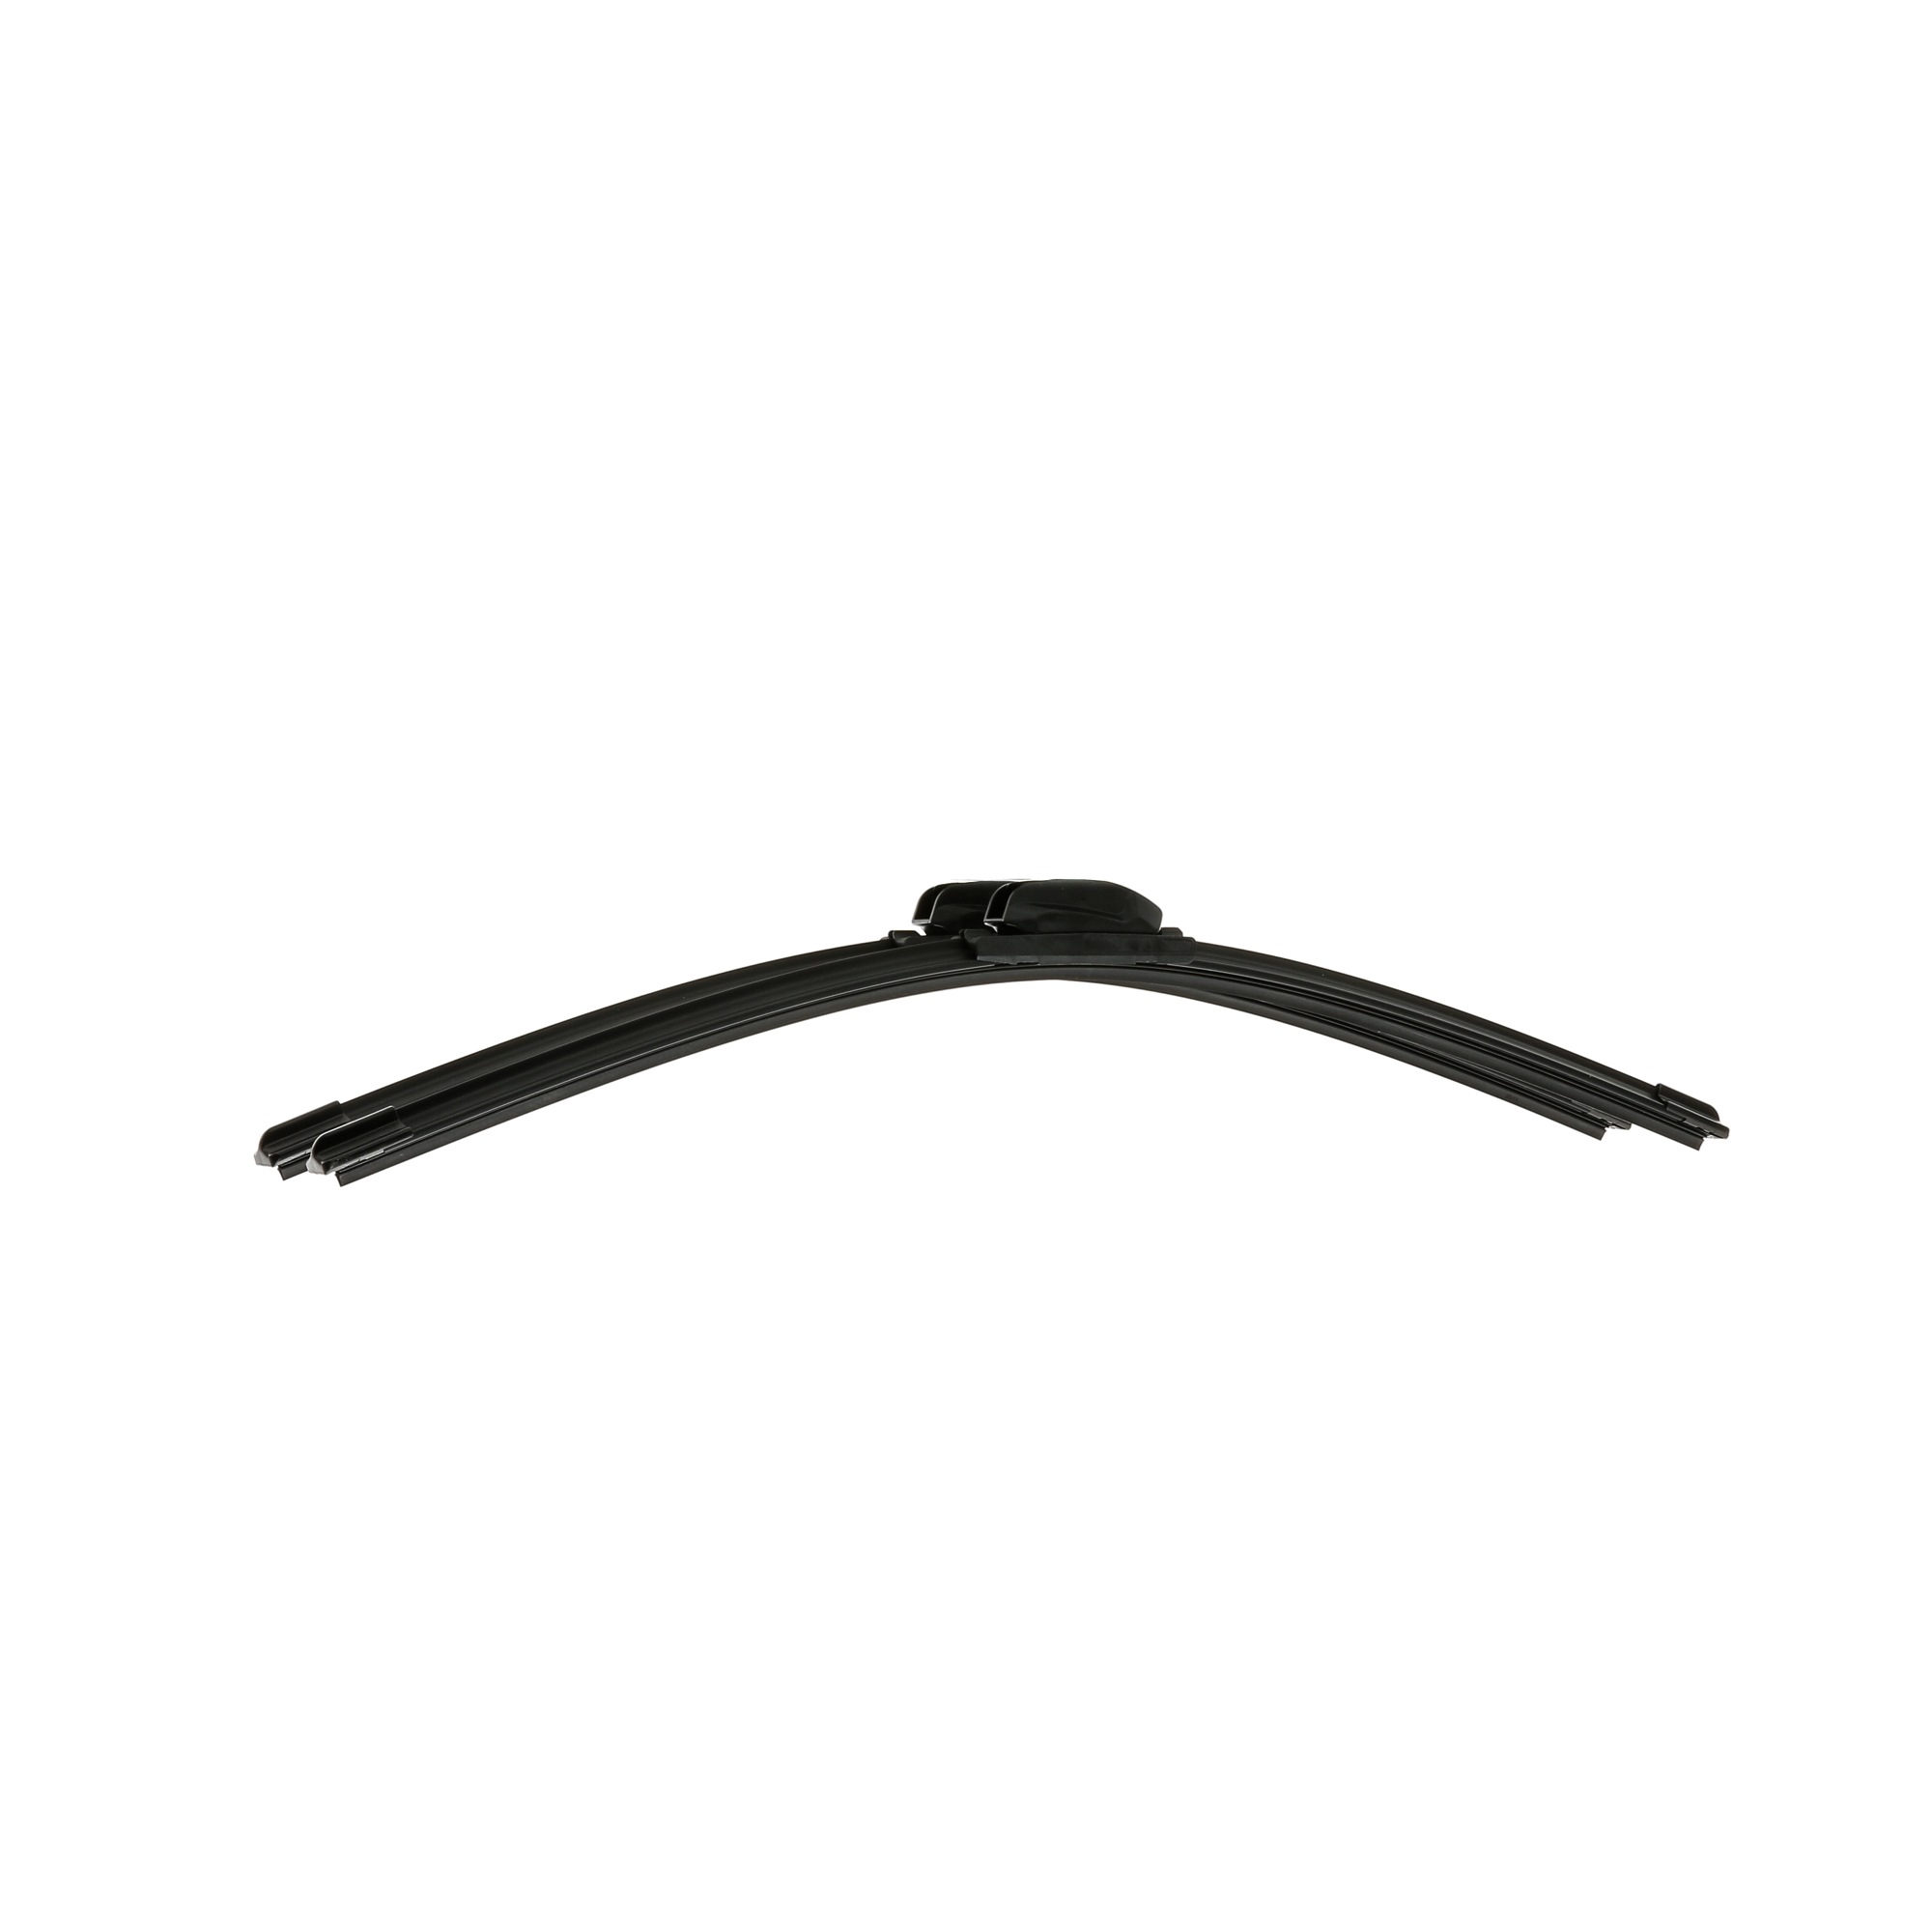 RIDEX 298W0414 Wiper blade 550/550 mm Front, Beam, for left-hand drive vehicles, 22/22 Inch